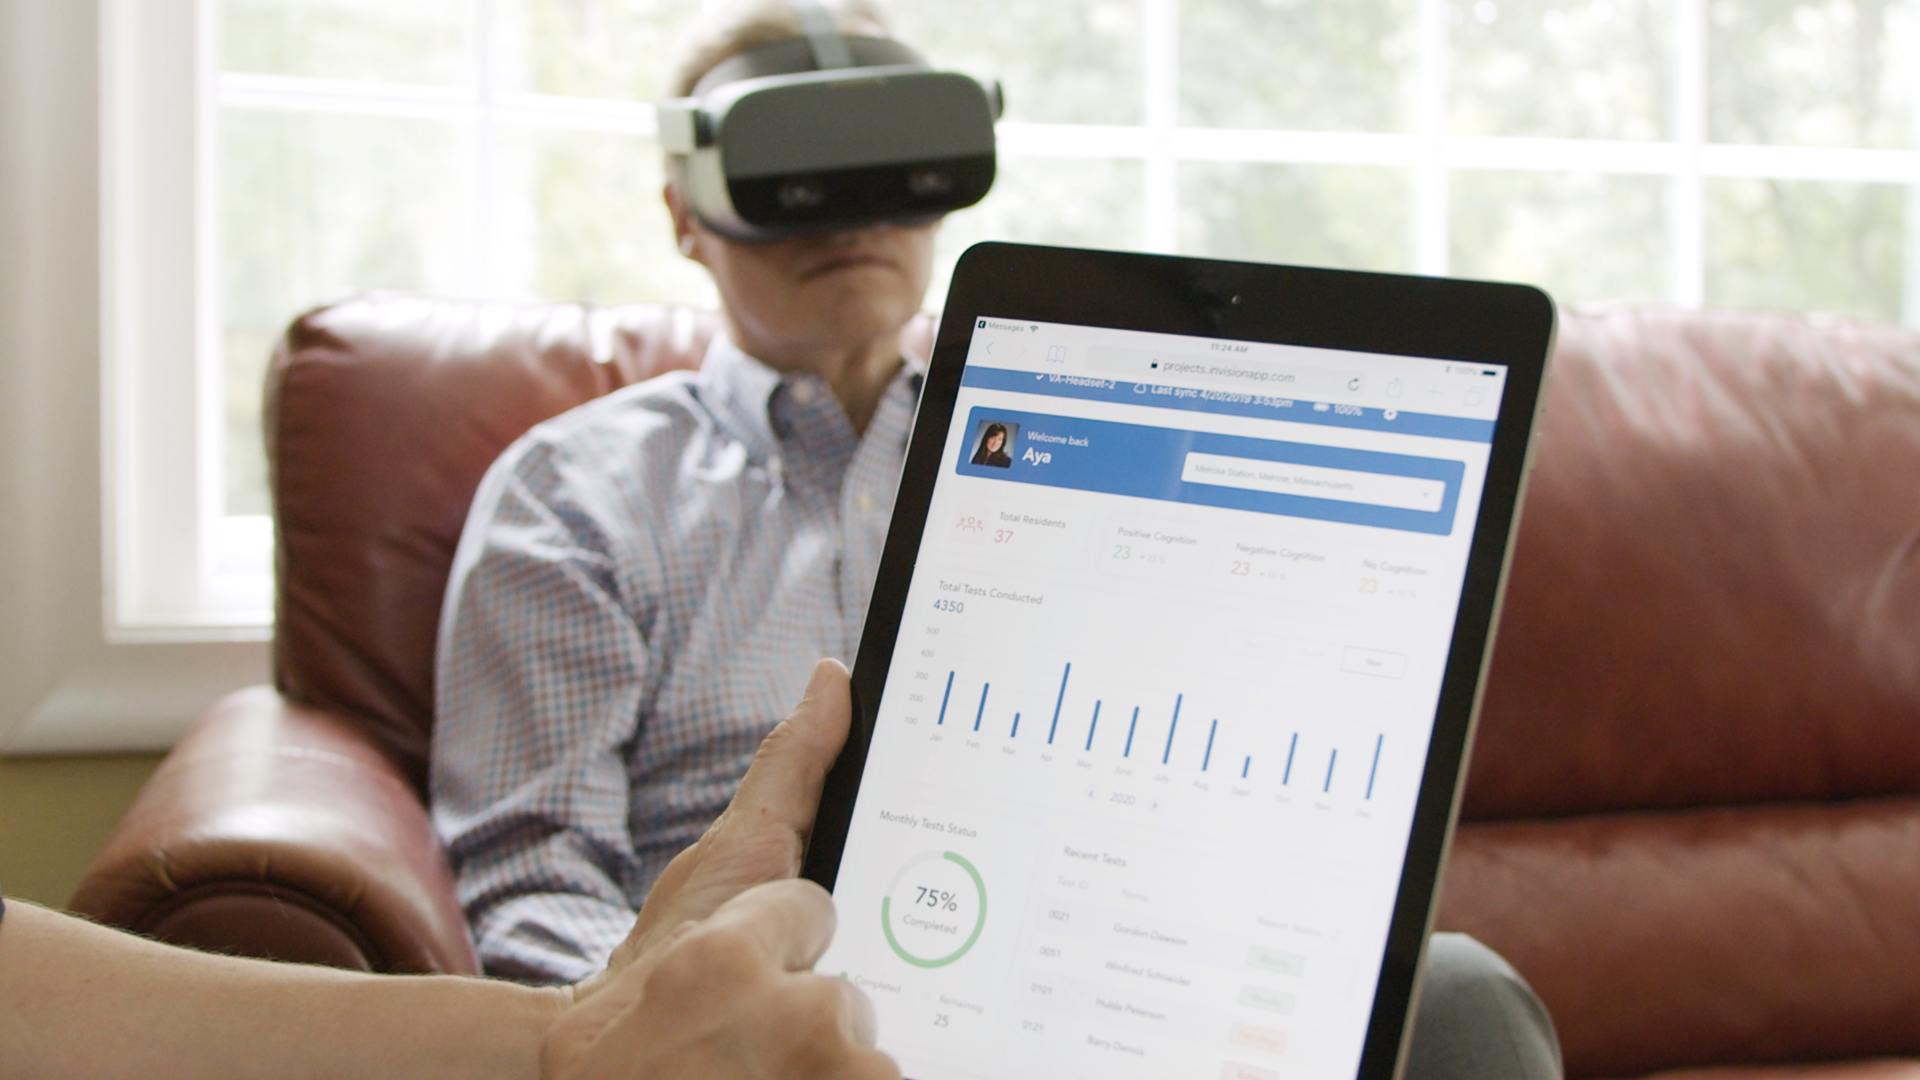 Man wearing a virtual reality headset sitting on a couch while a person holds a tablet displaying data.